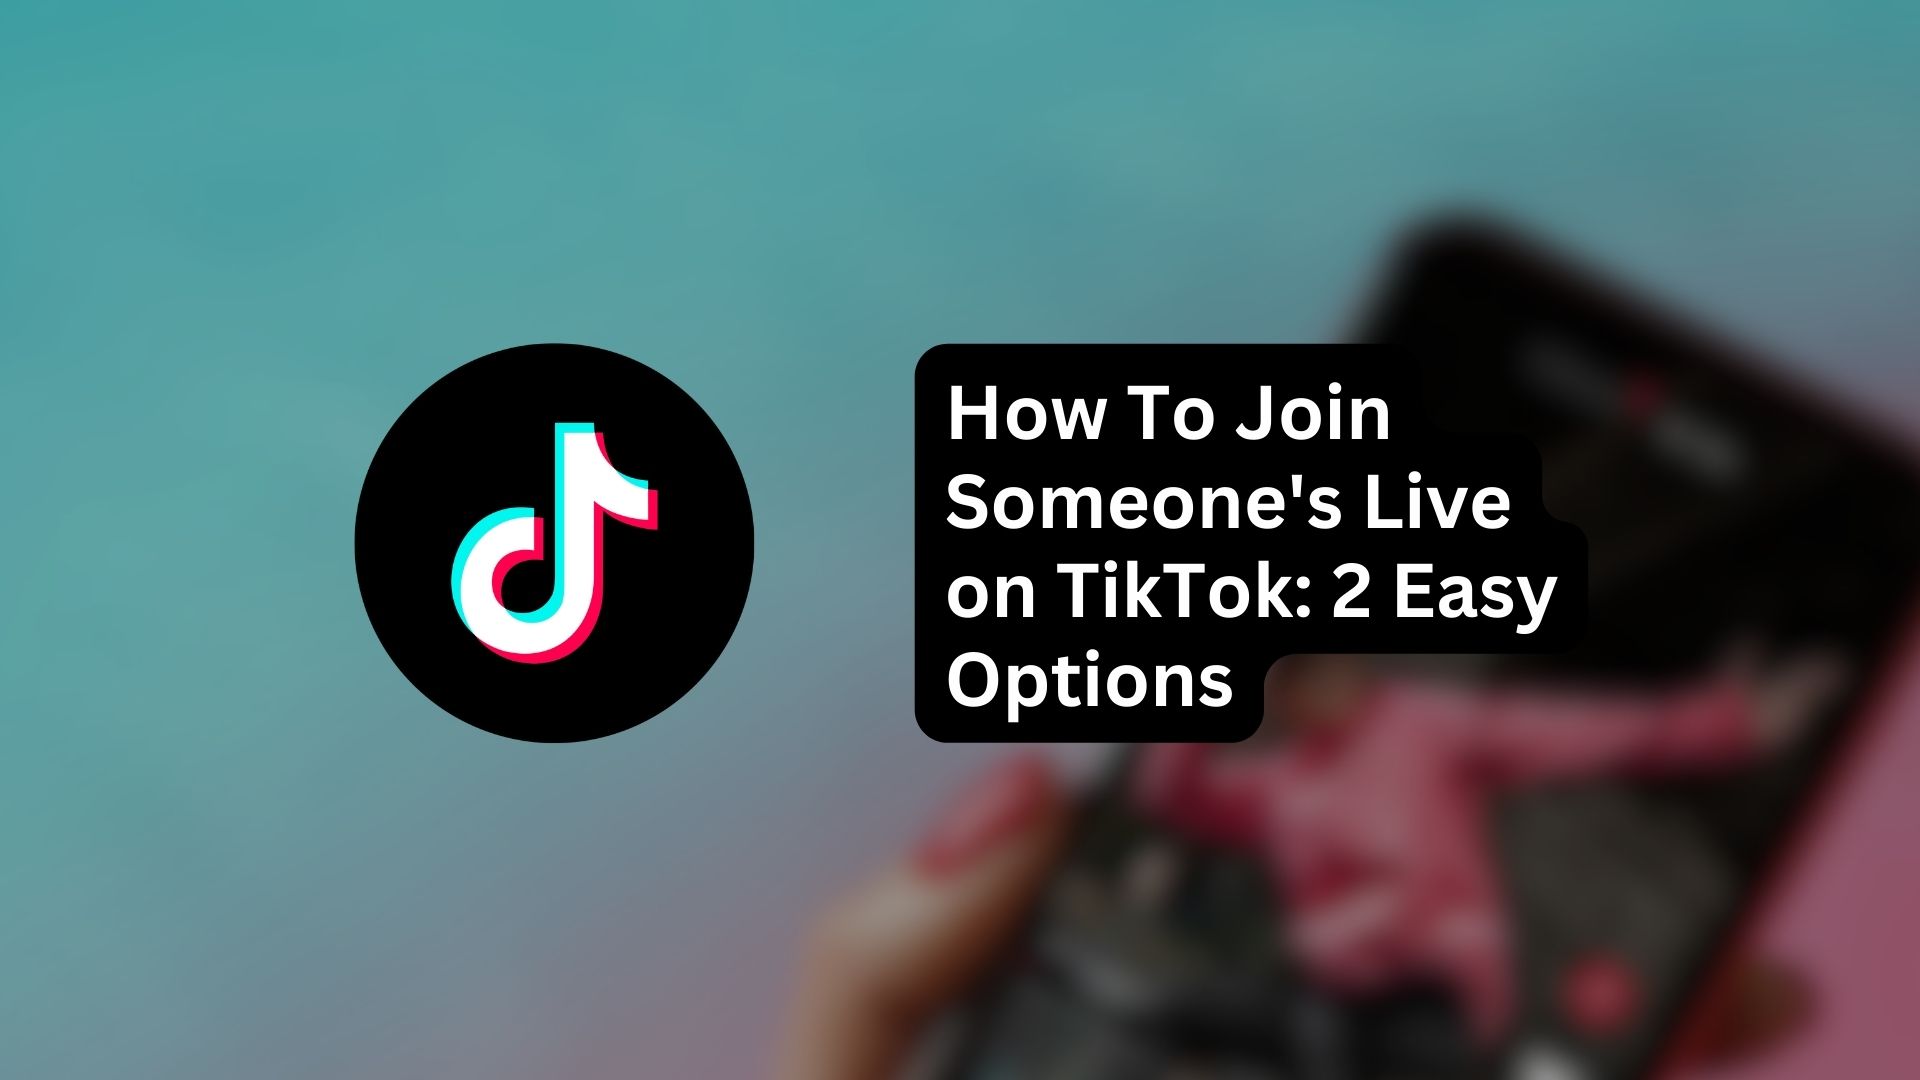 how to join someone's live on Tiktok